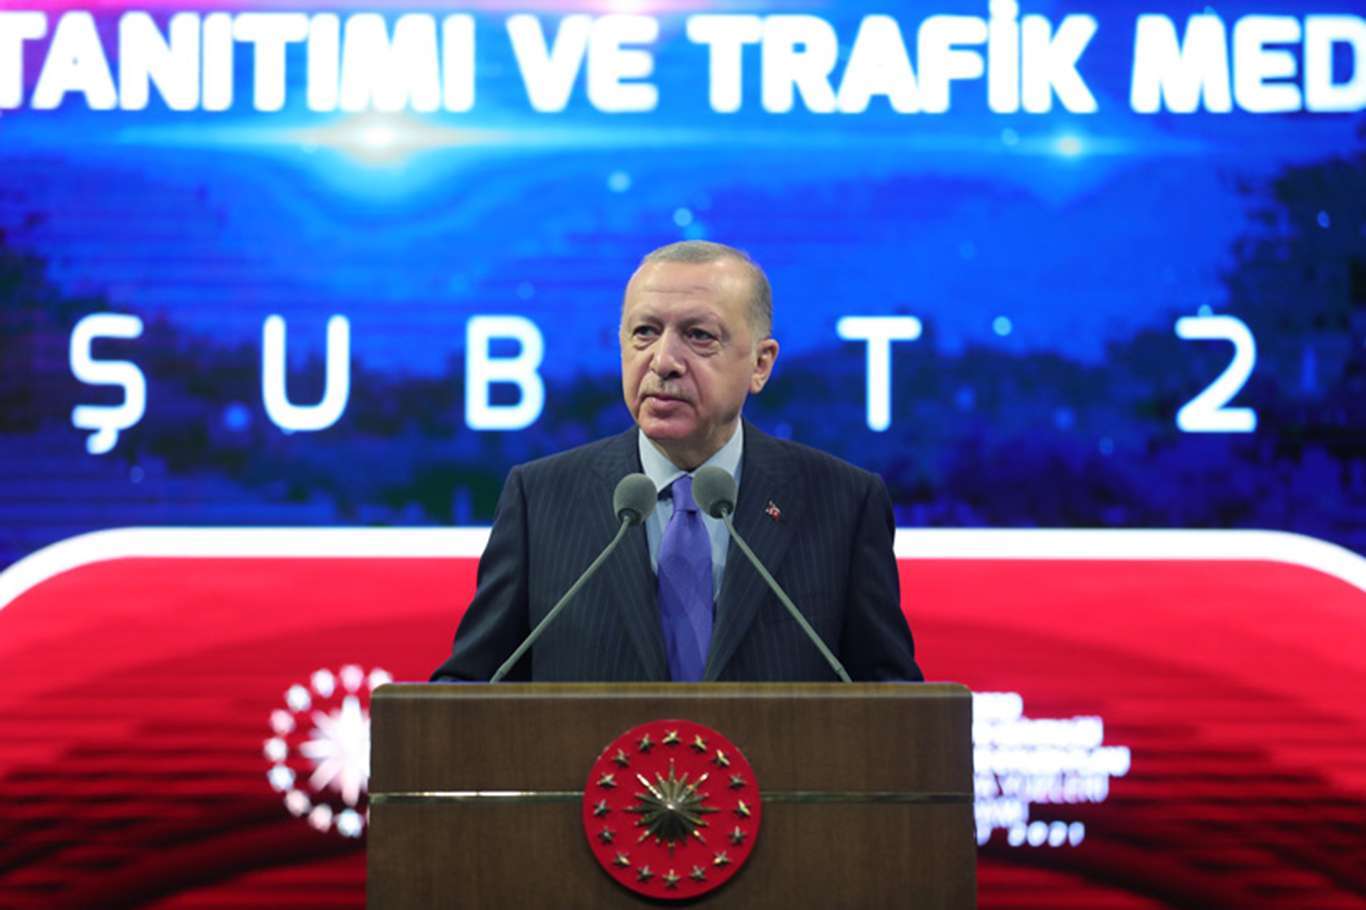 Erdoğan: It is a must for everyone living in Turkey to support the works on road safety